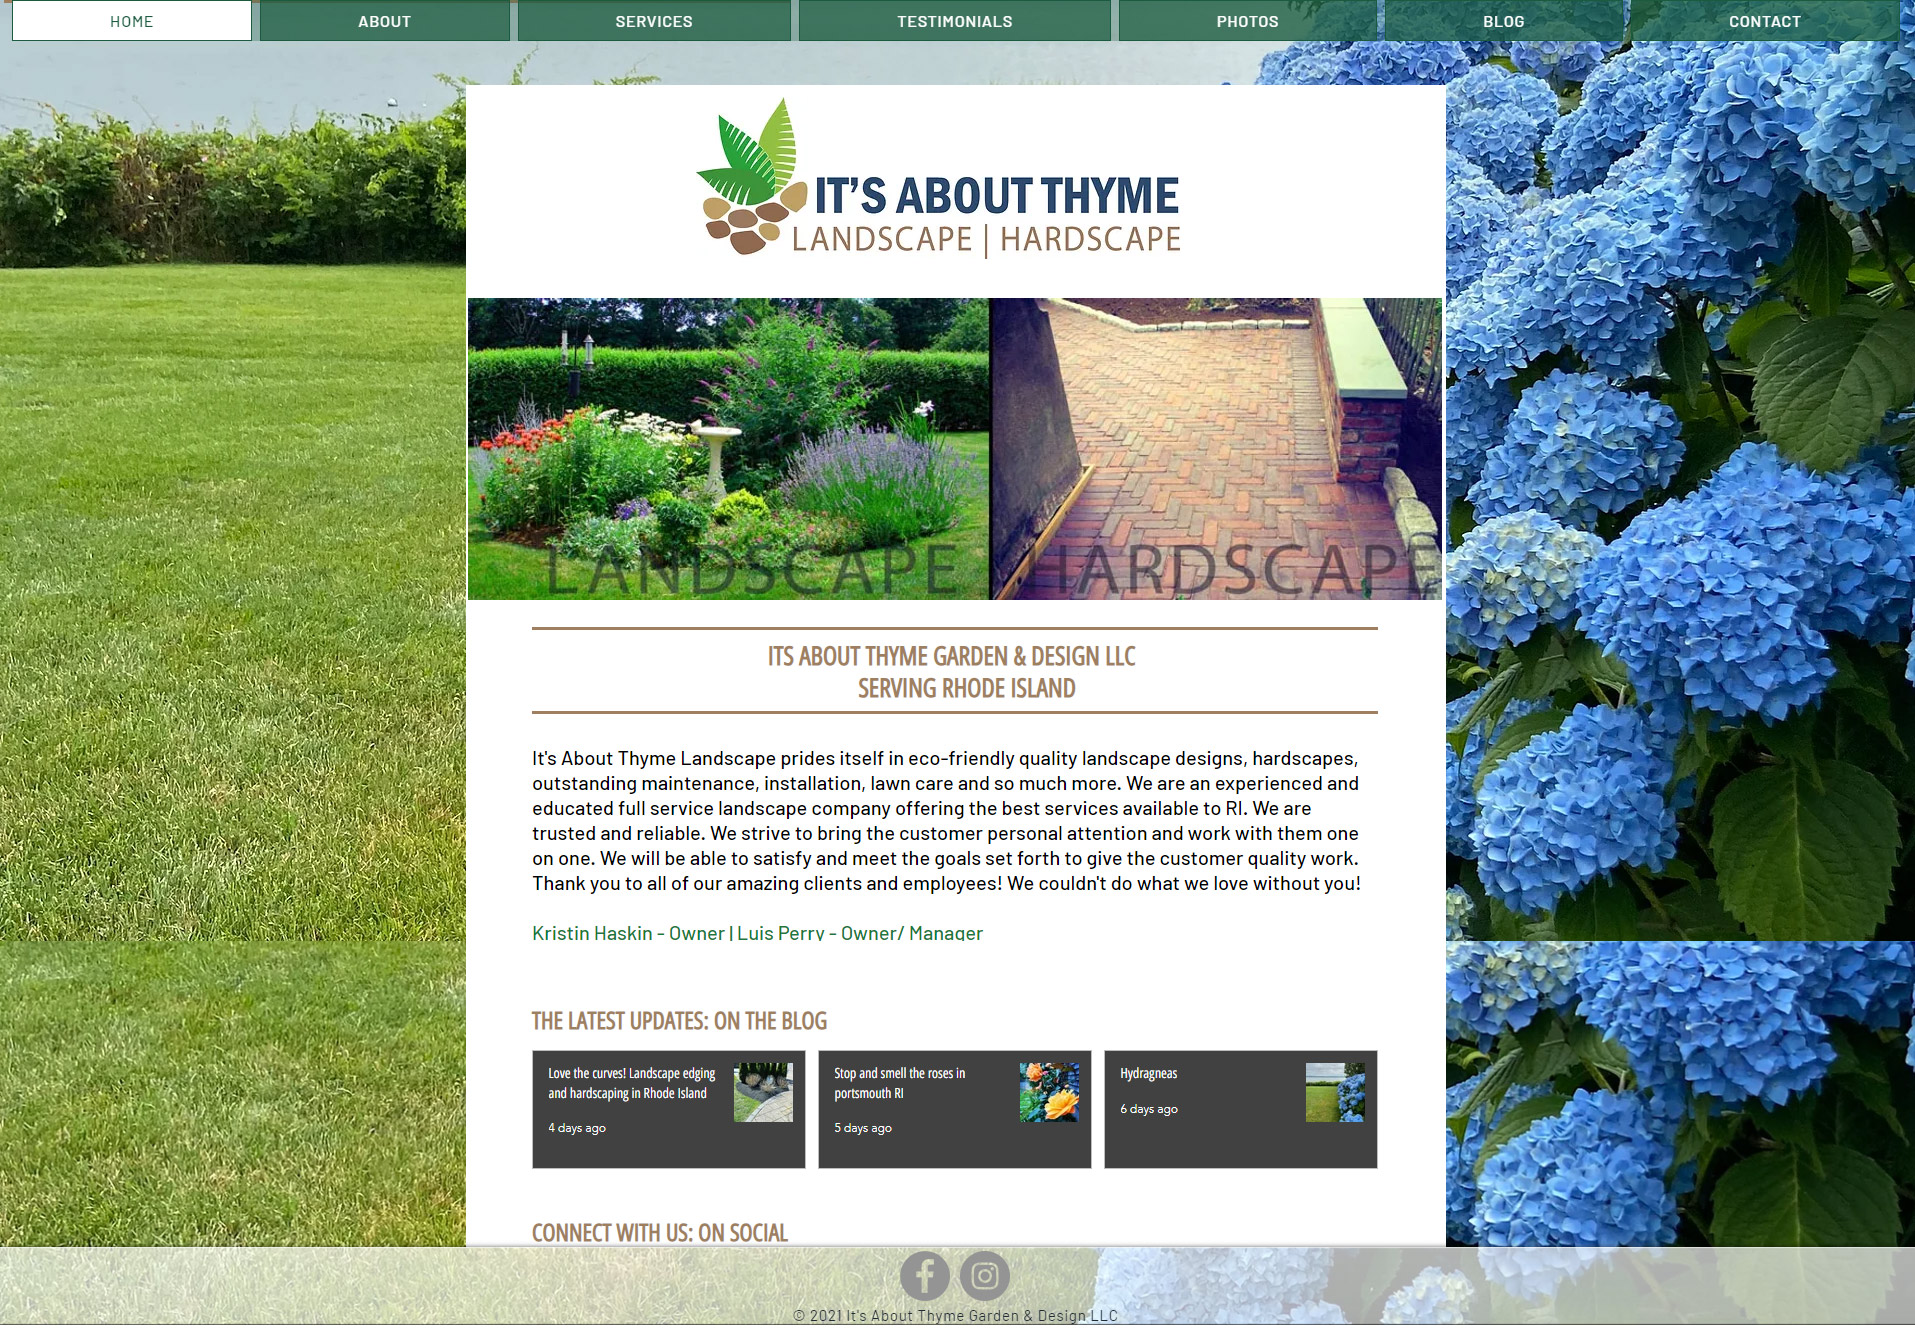 It’s About Thyme Garden & Design launches new identity and new mobile web presence